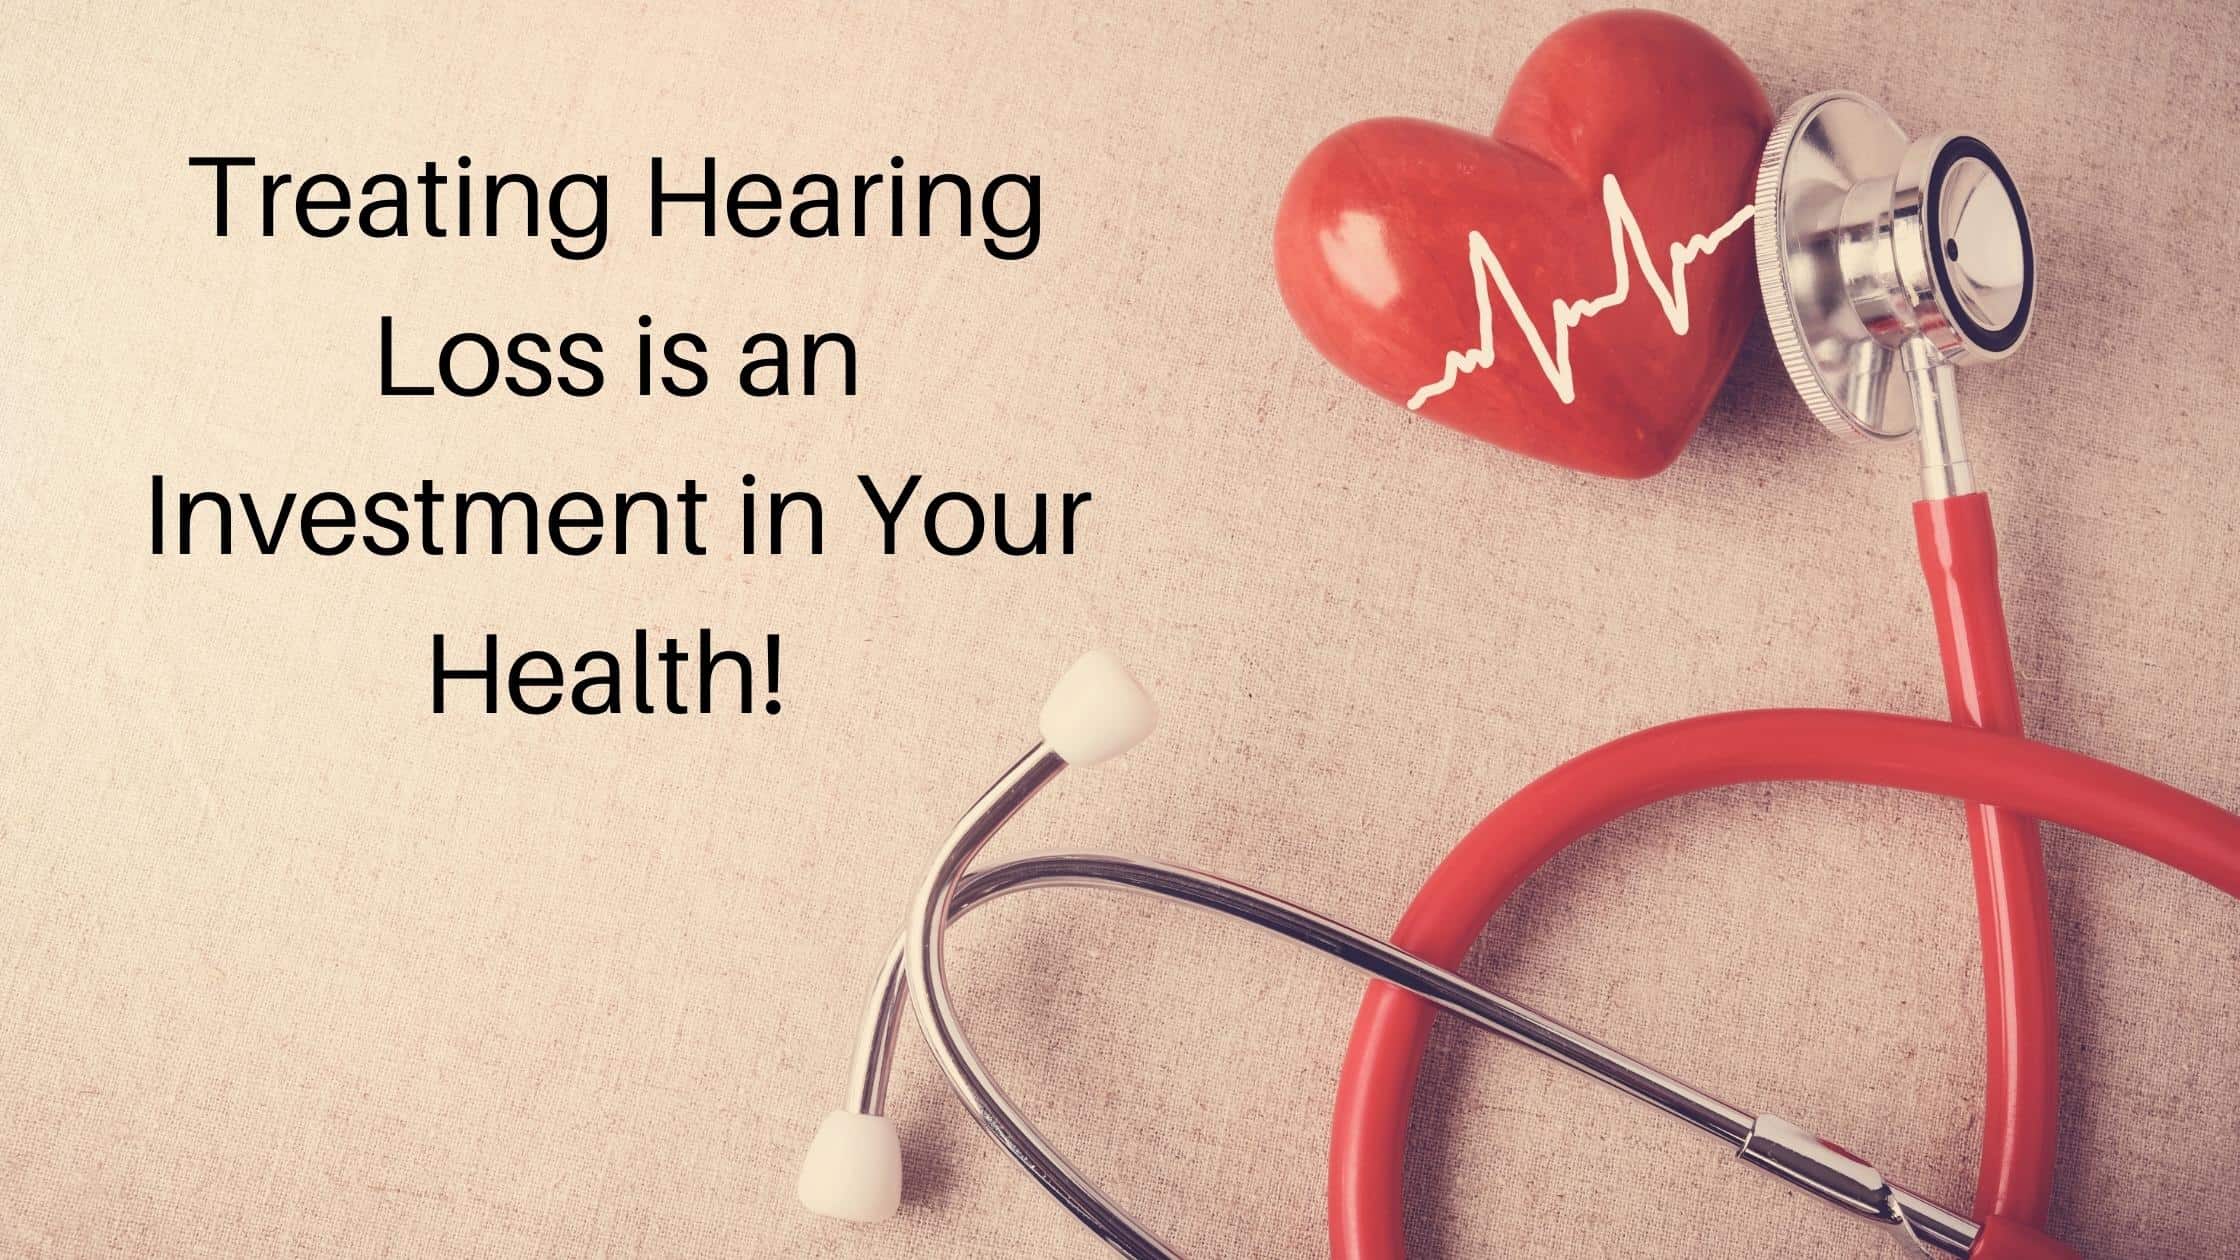 Featured image for “Treating Hearing Loss is an Investment in Your Health!”